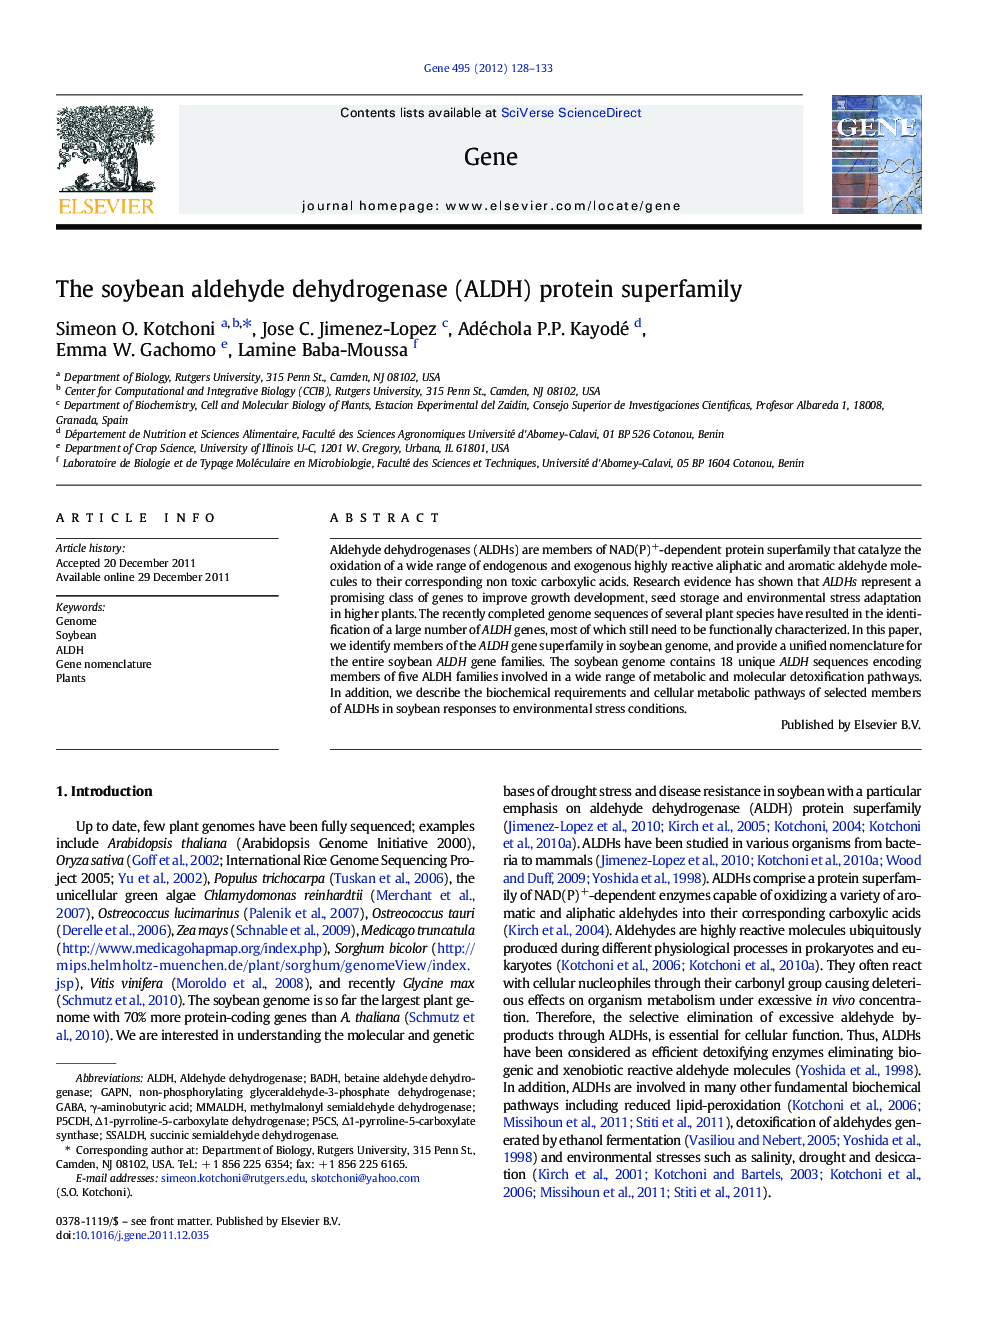 The soybean aldehyde dehydrogenase (ALDH) protein superfamily